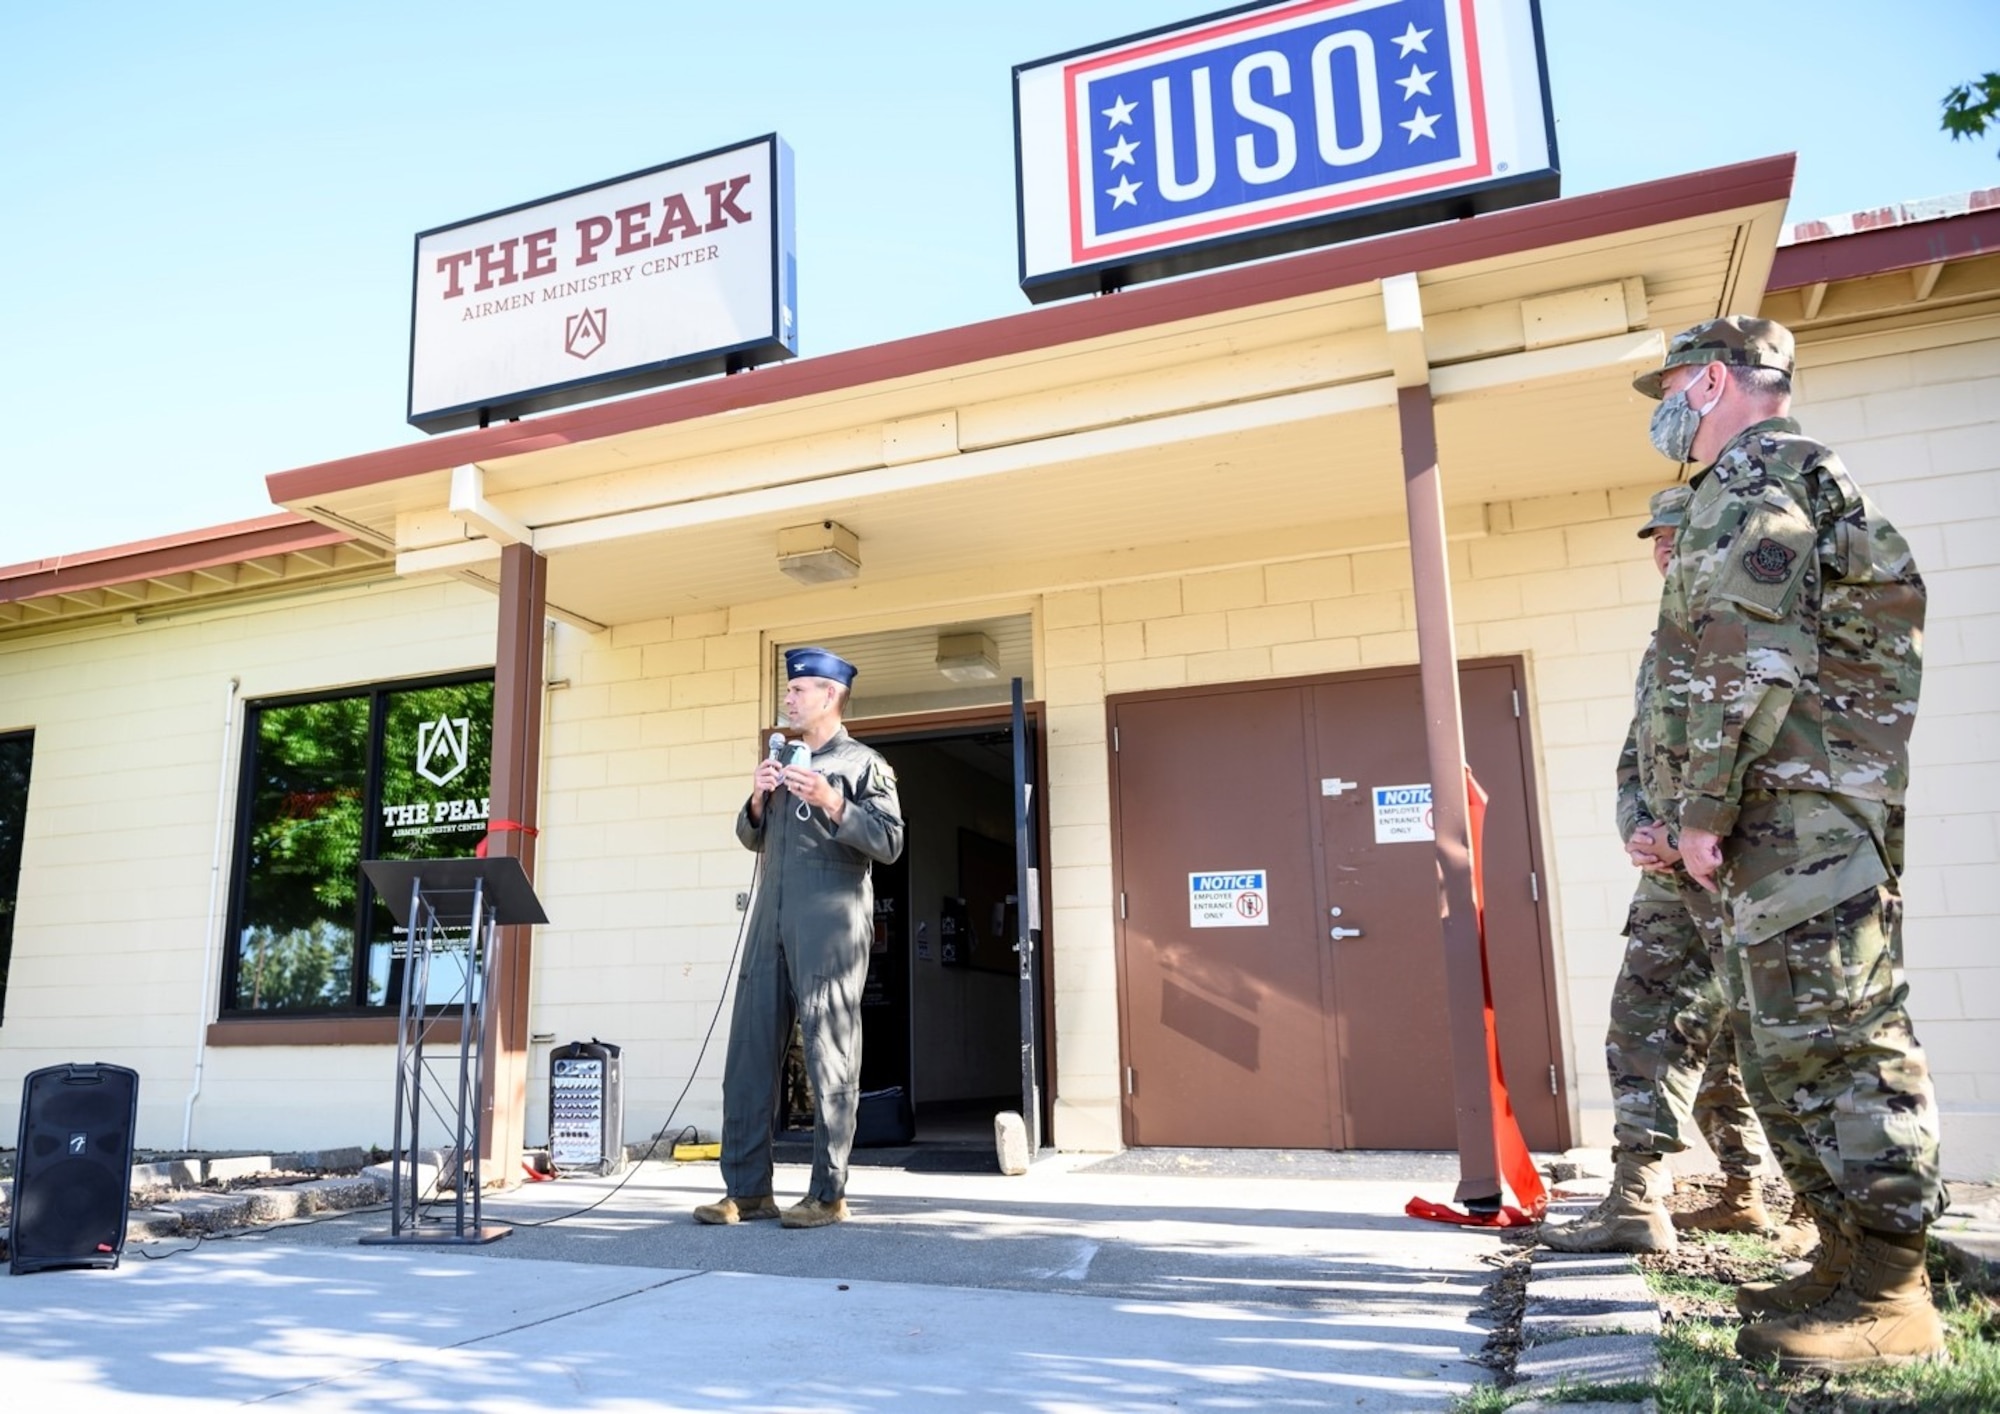 U.S. Air Force Col. Zachery Jiron, 60th Air Mobility Wing vice commander, speaks during a ceremony commemorating the re-opening of the Peak Café May 19, 2021, at Travis Air Force Base, California. The re-opening, which was also attended by Chief Master Sgt. Robert Schultz, 60th AMW command chief, represented a step towards normalcy for the base that, for over a year, has paused many of its recreational activities due to COVID-19.